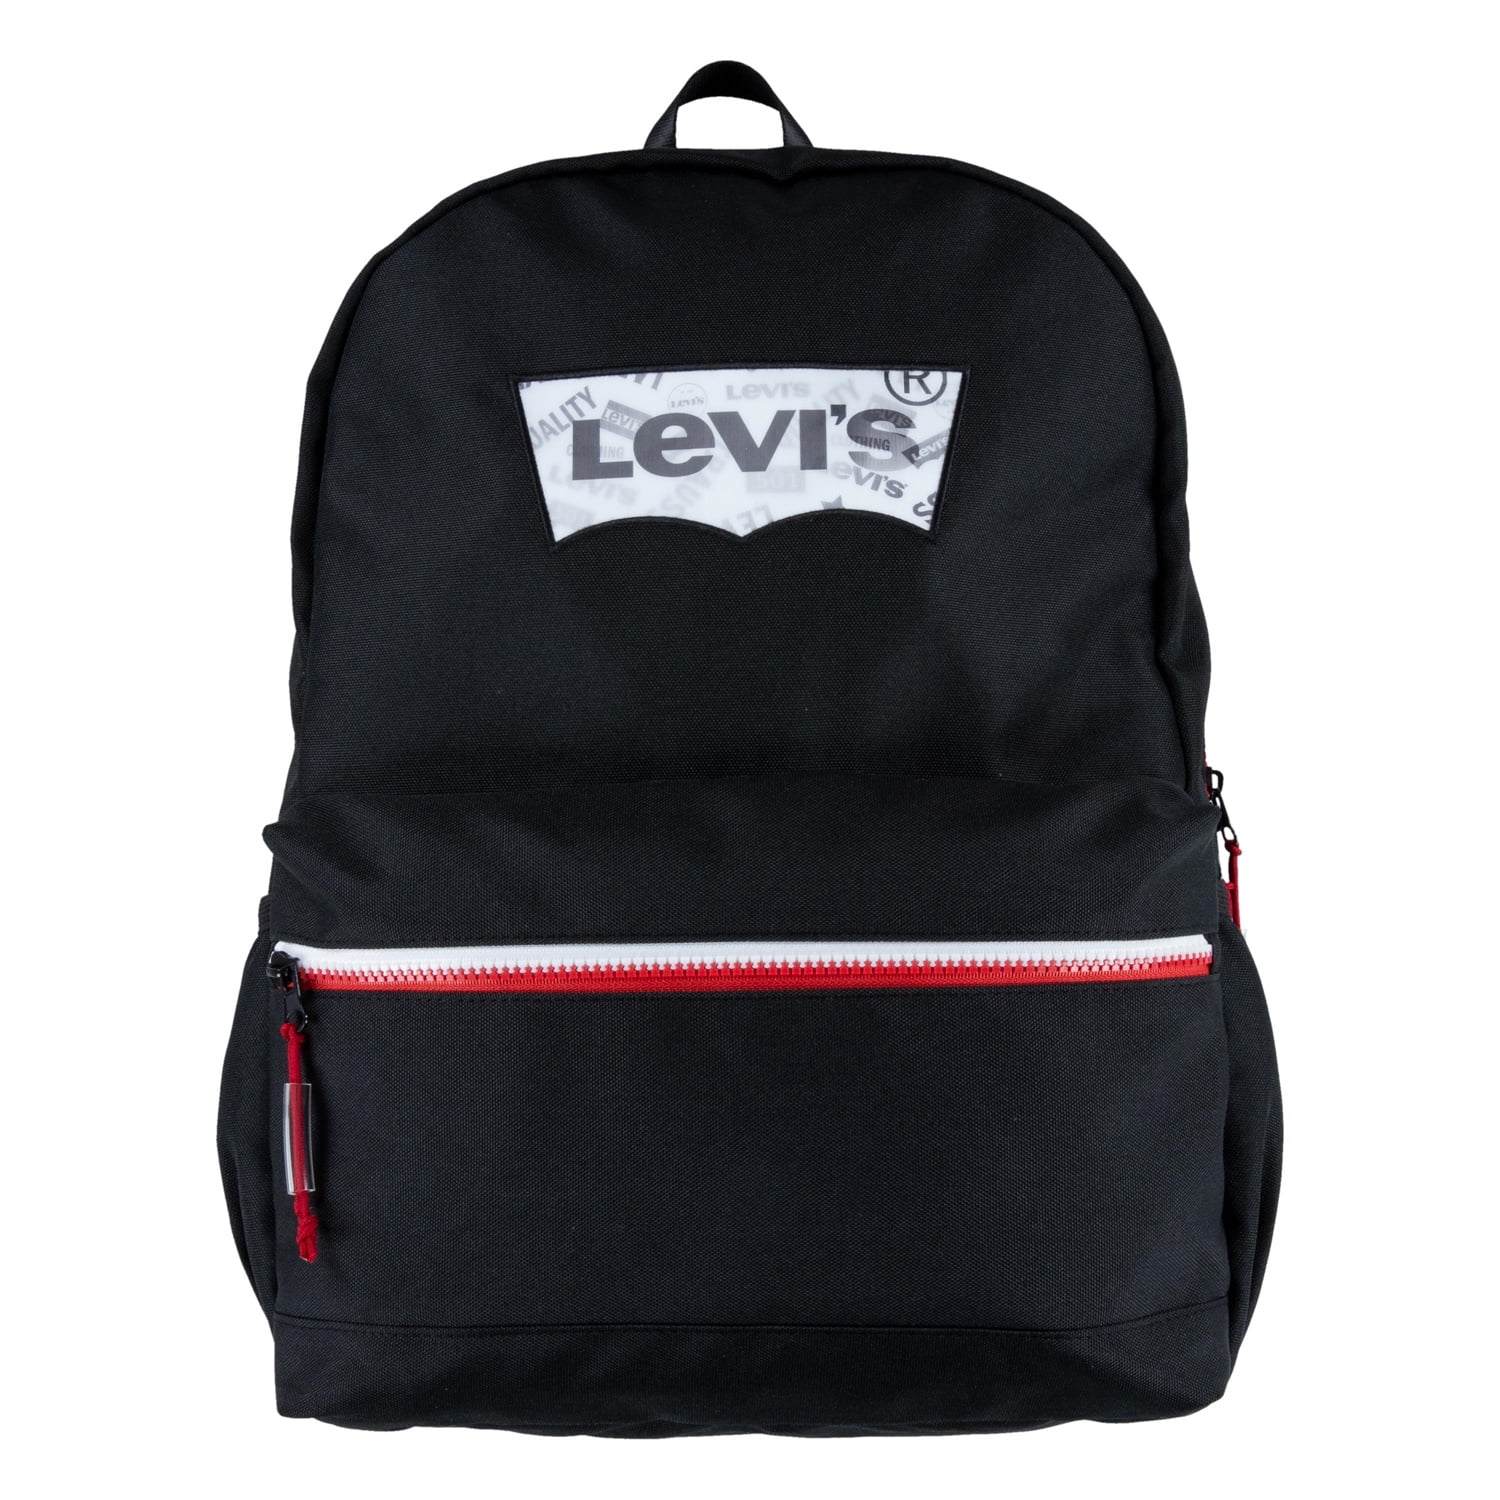 Levi's Unisex Adult Classic Logo Backpack, Black and Red 